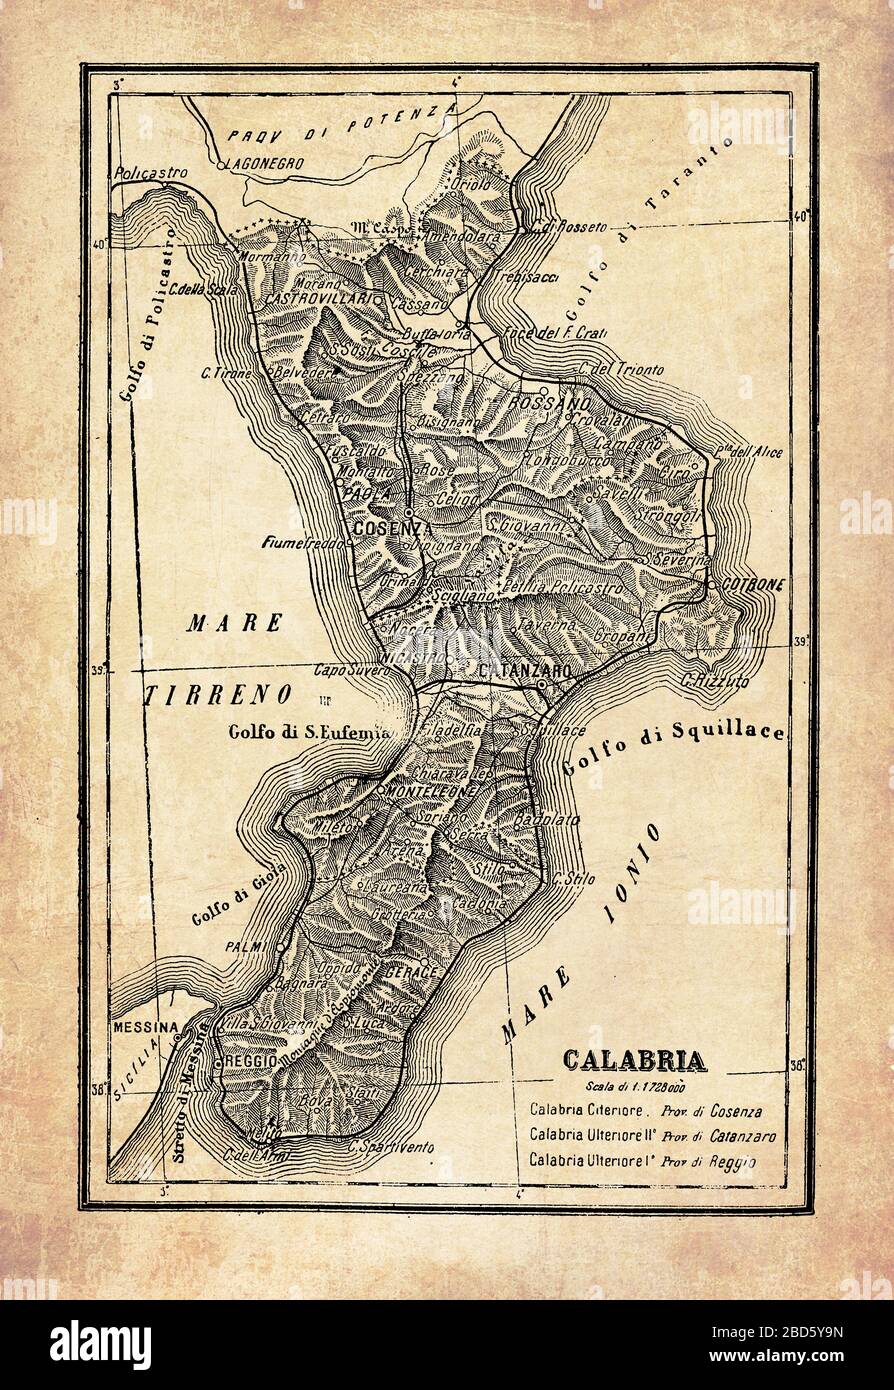 Ancient map of Calabria region in Southern Italy surrounded by Jonian and Tyrrhenian seas separated from Sicily by the Strait of Messina, with geographical Italian names and descriptions Stock Photo